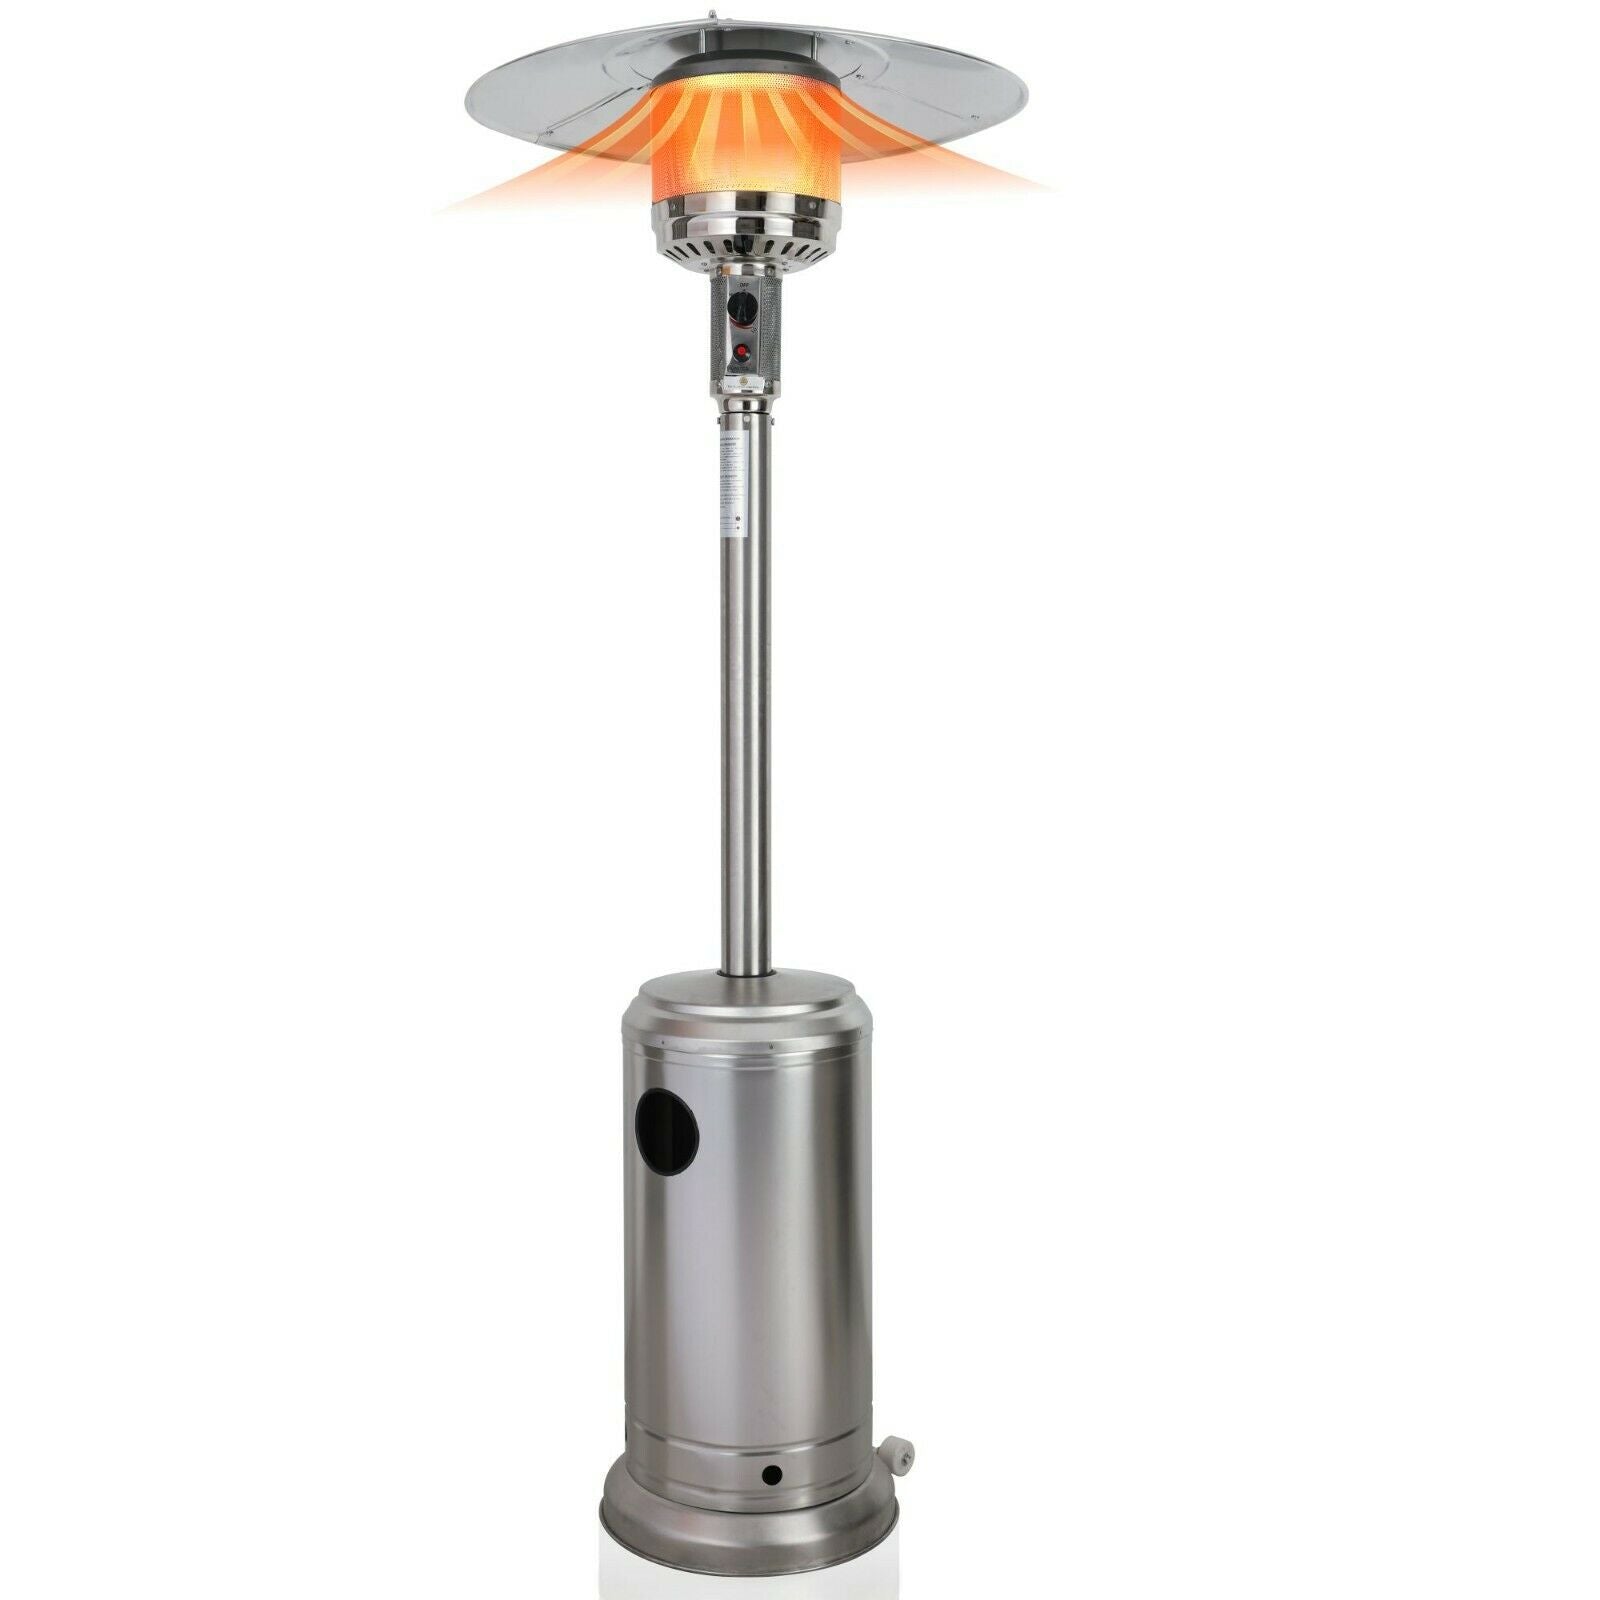 Patio Heater Gas Outdoor Garden 12.5kW NEW Stainless Steel hot tub